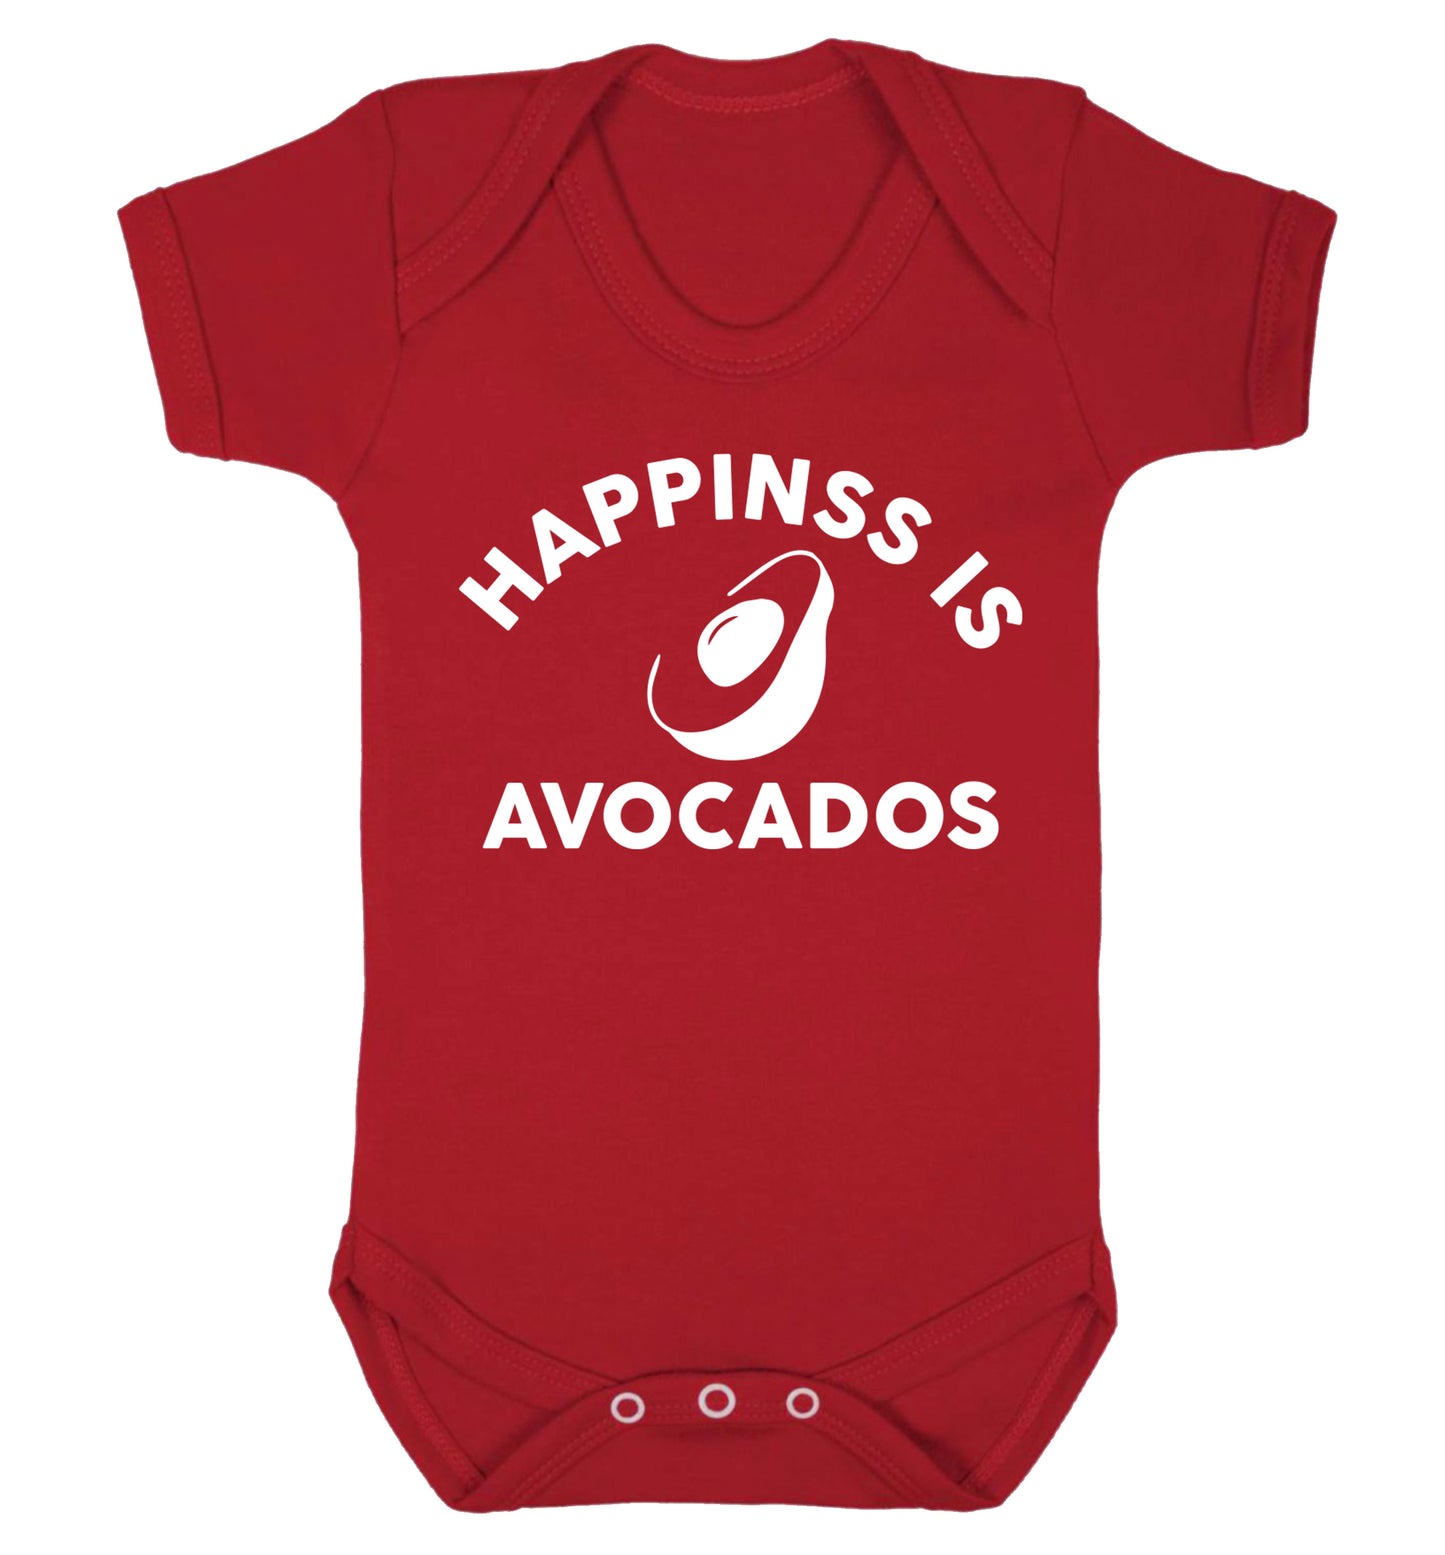 Happiness is avocados Baby Vest red 18-24 months